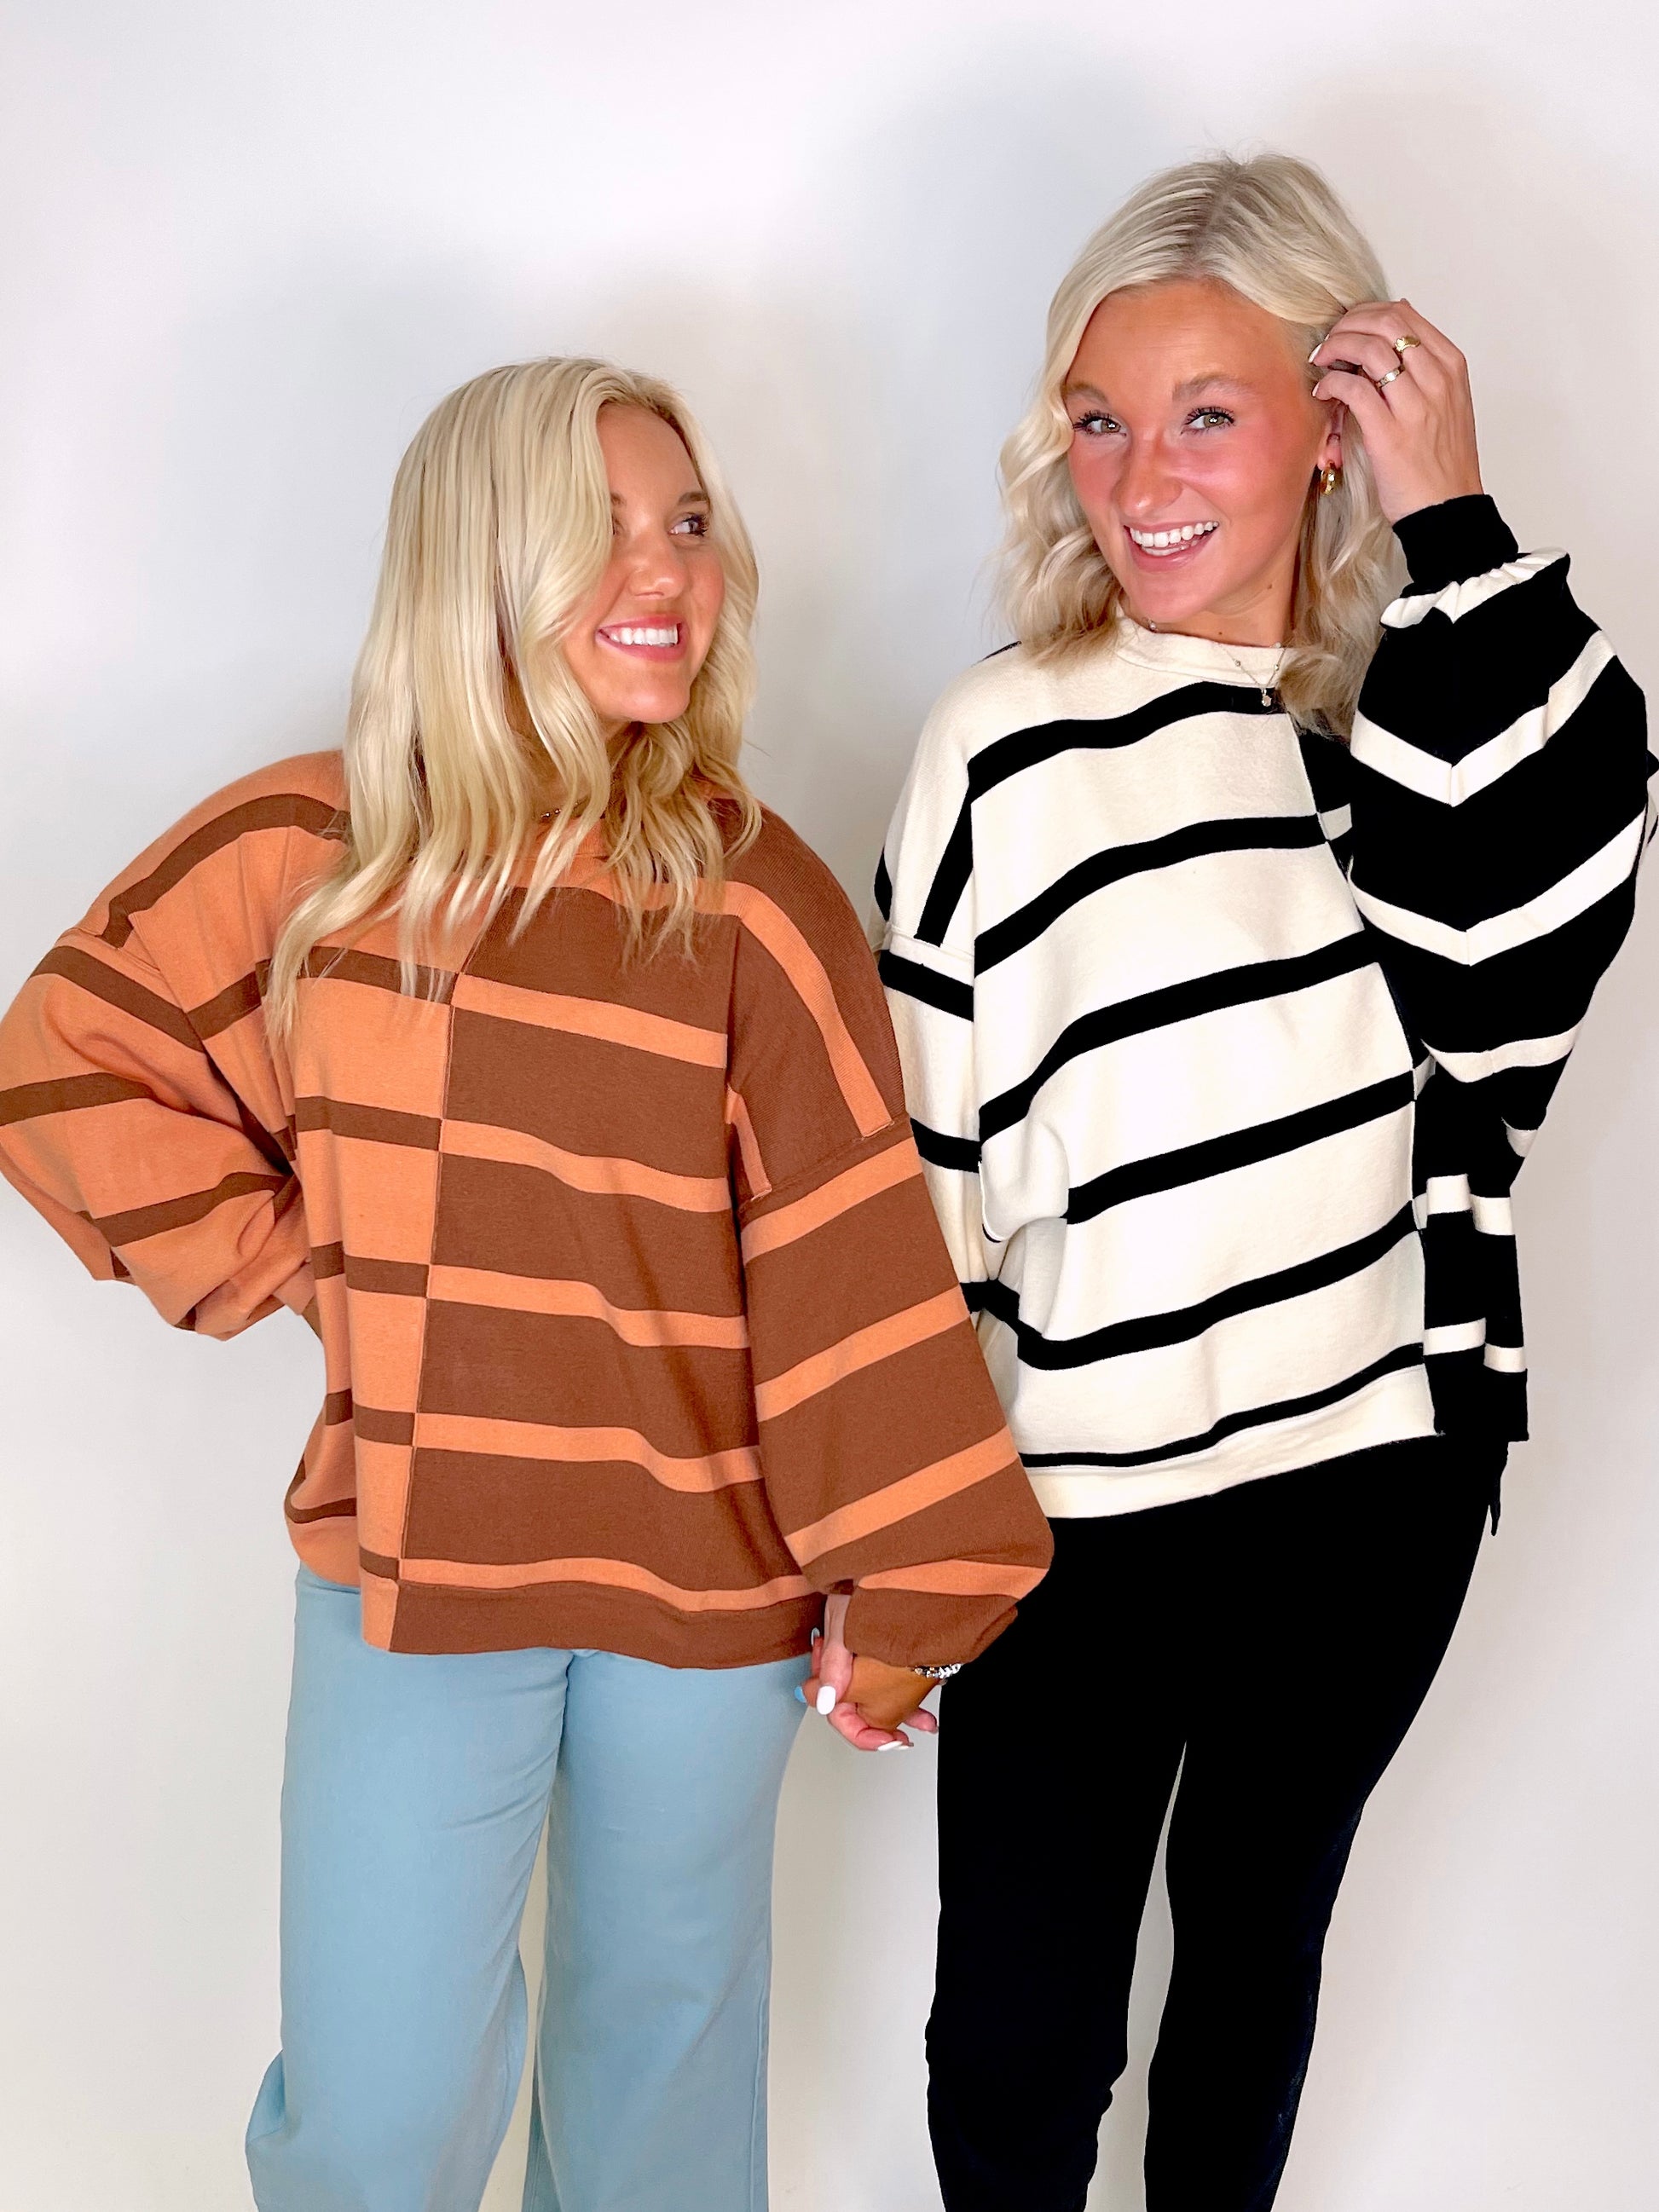 The Sydney Sweater-Sweaters-Miou Muse-The Village Shoppe, Women’s Fashion Boutique, Shop Online and In Store - Located in Muscle Shoals, AL.